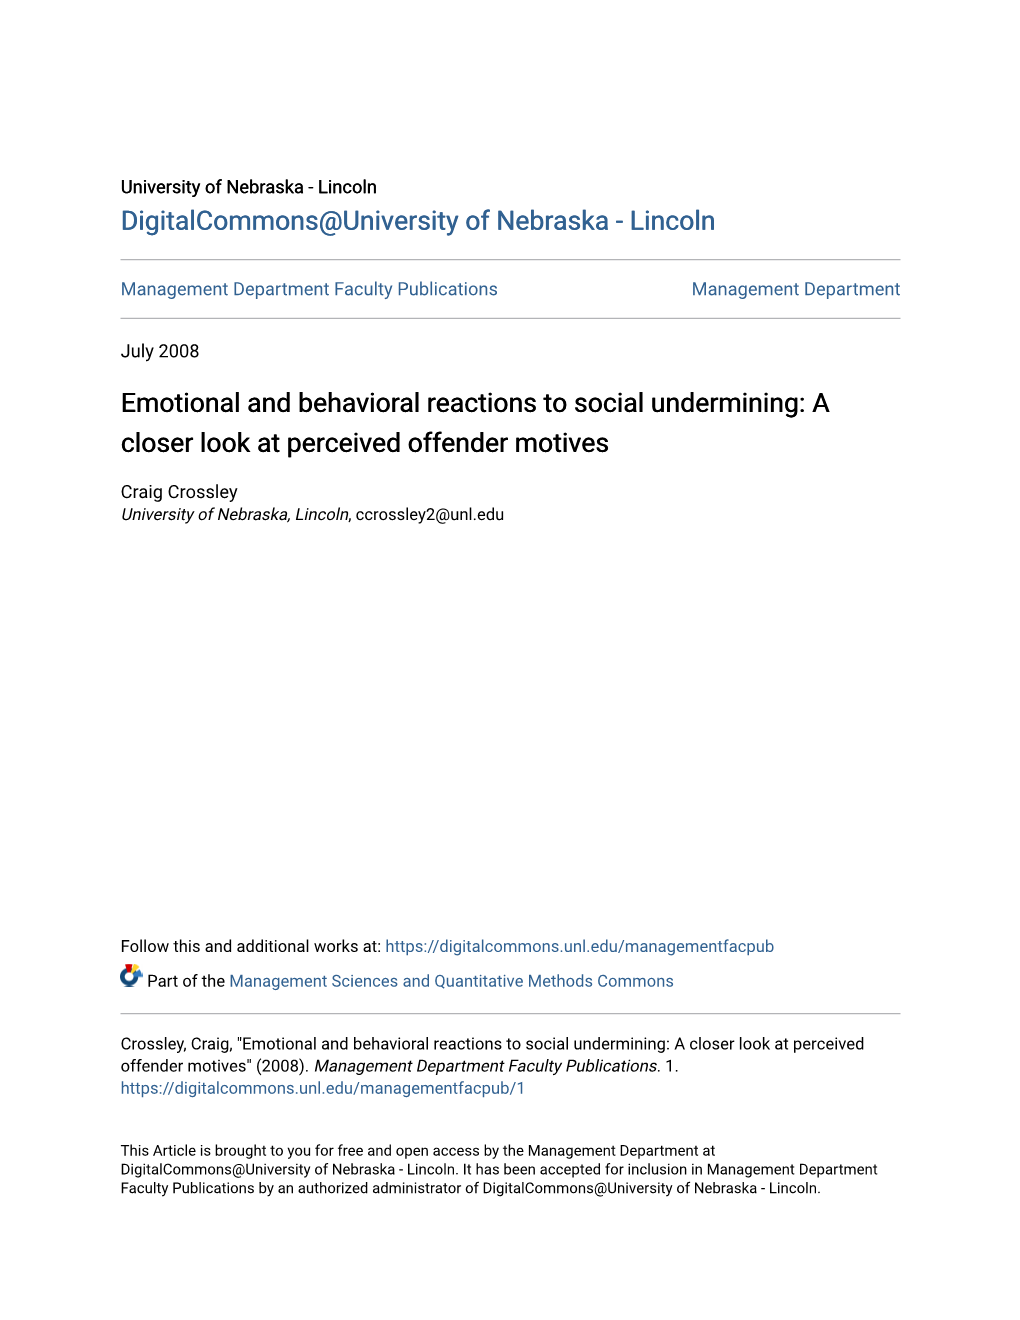 Emotional and Behavioral Reactions to Social Undermining: a Closer Look at Perceived Offender Motives